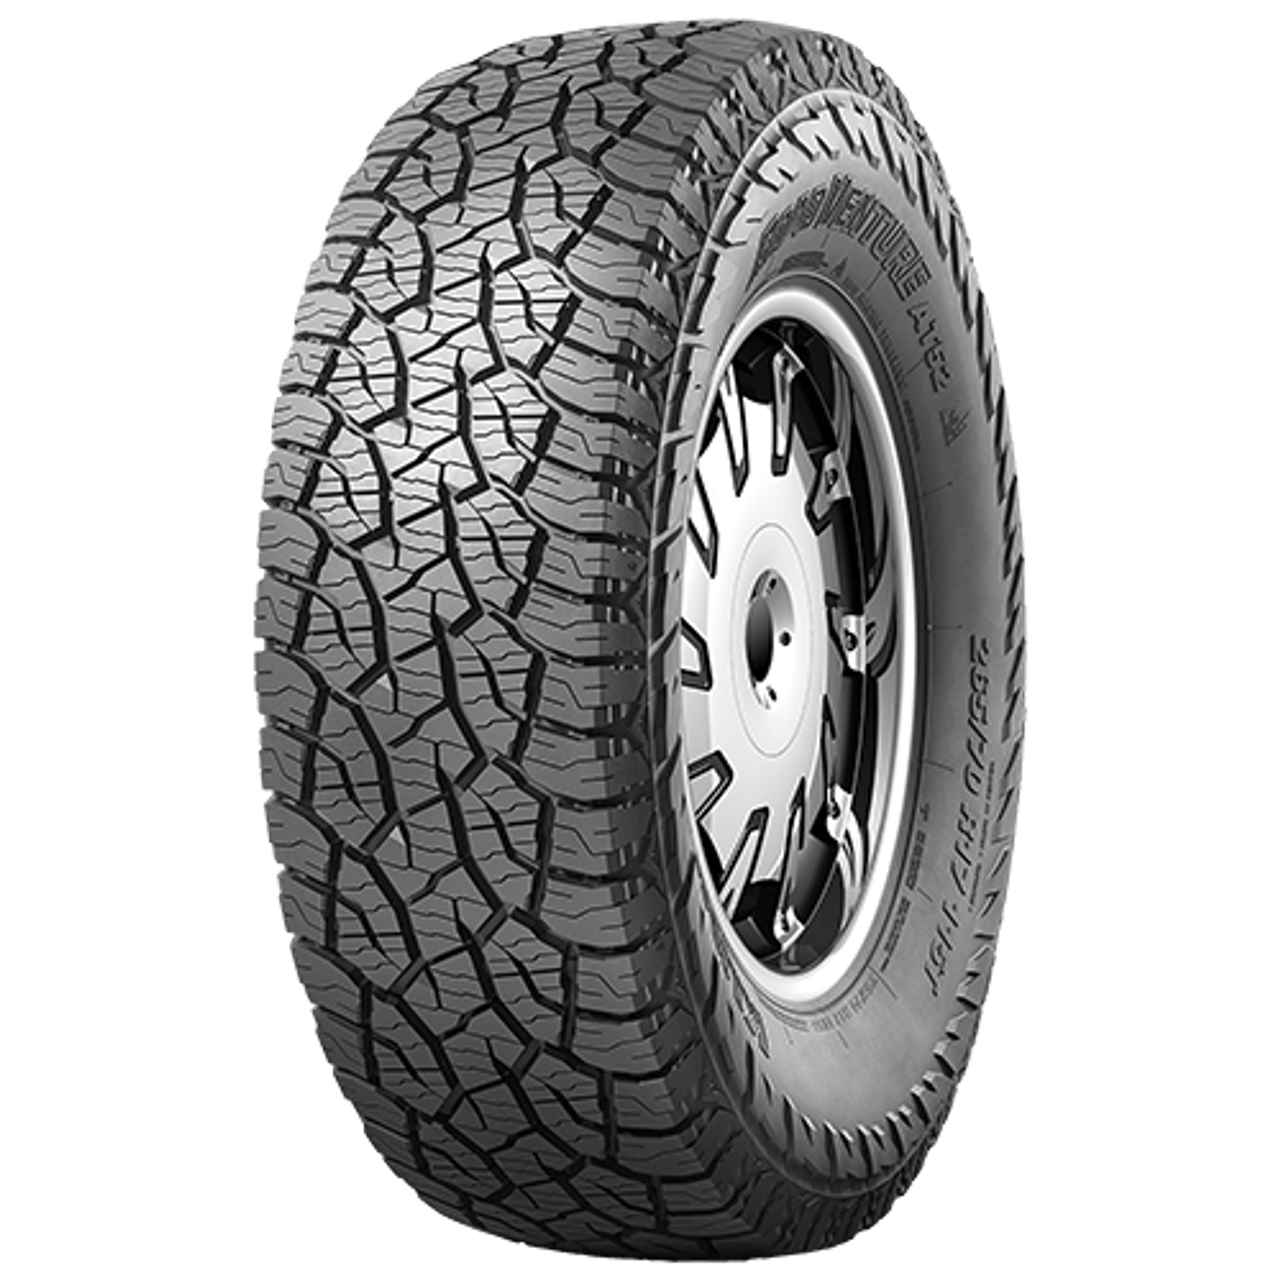 KUMHO ROAD VENTURE AT52 225/75R16 115S BSW